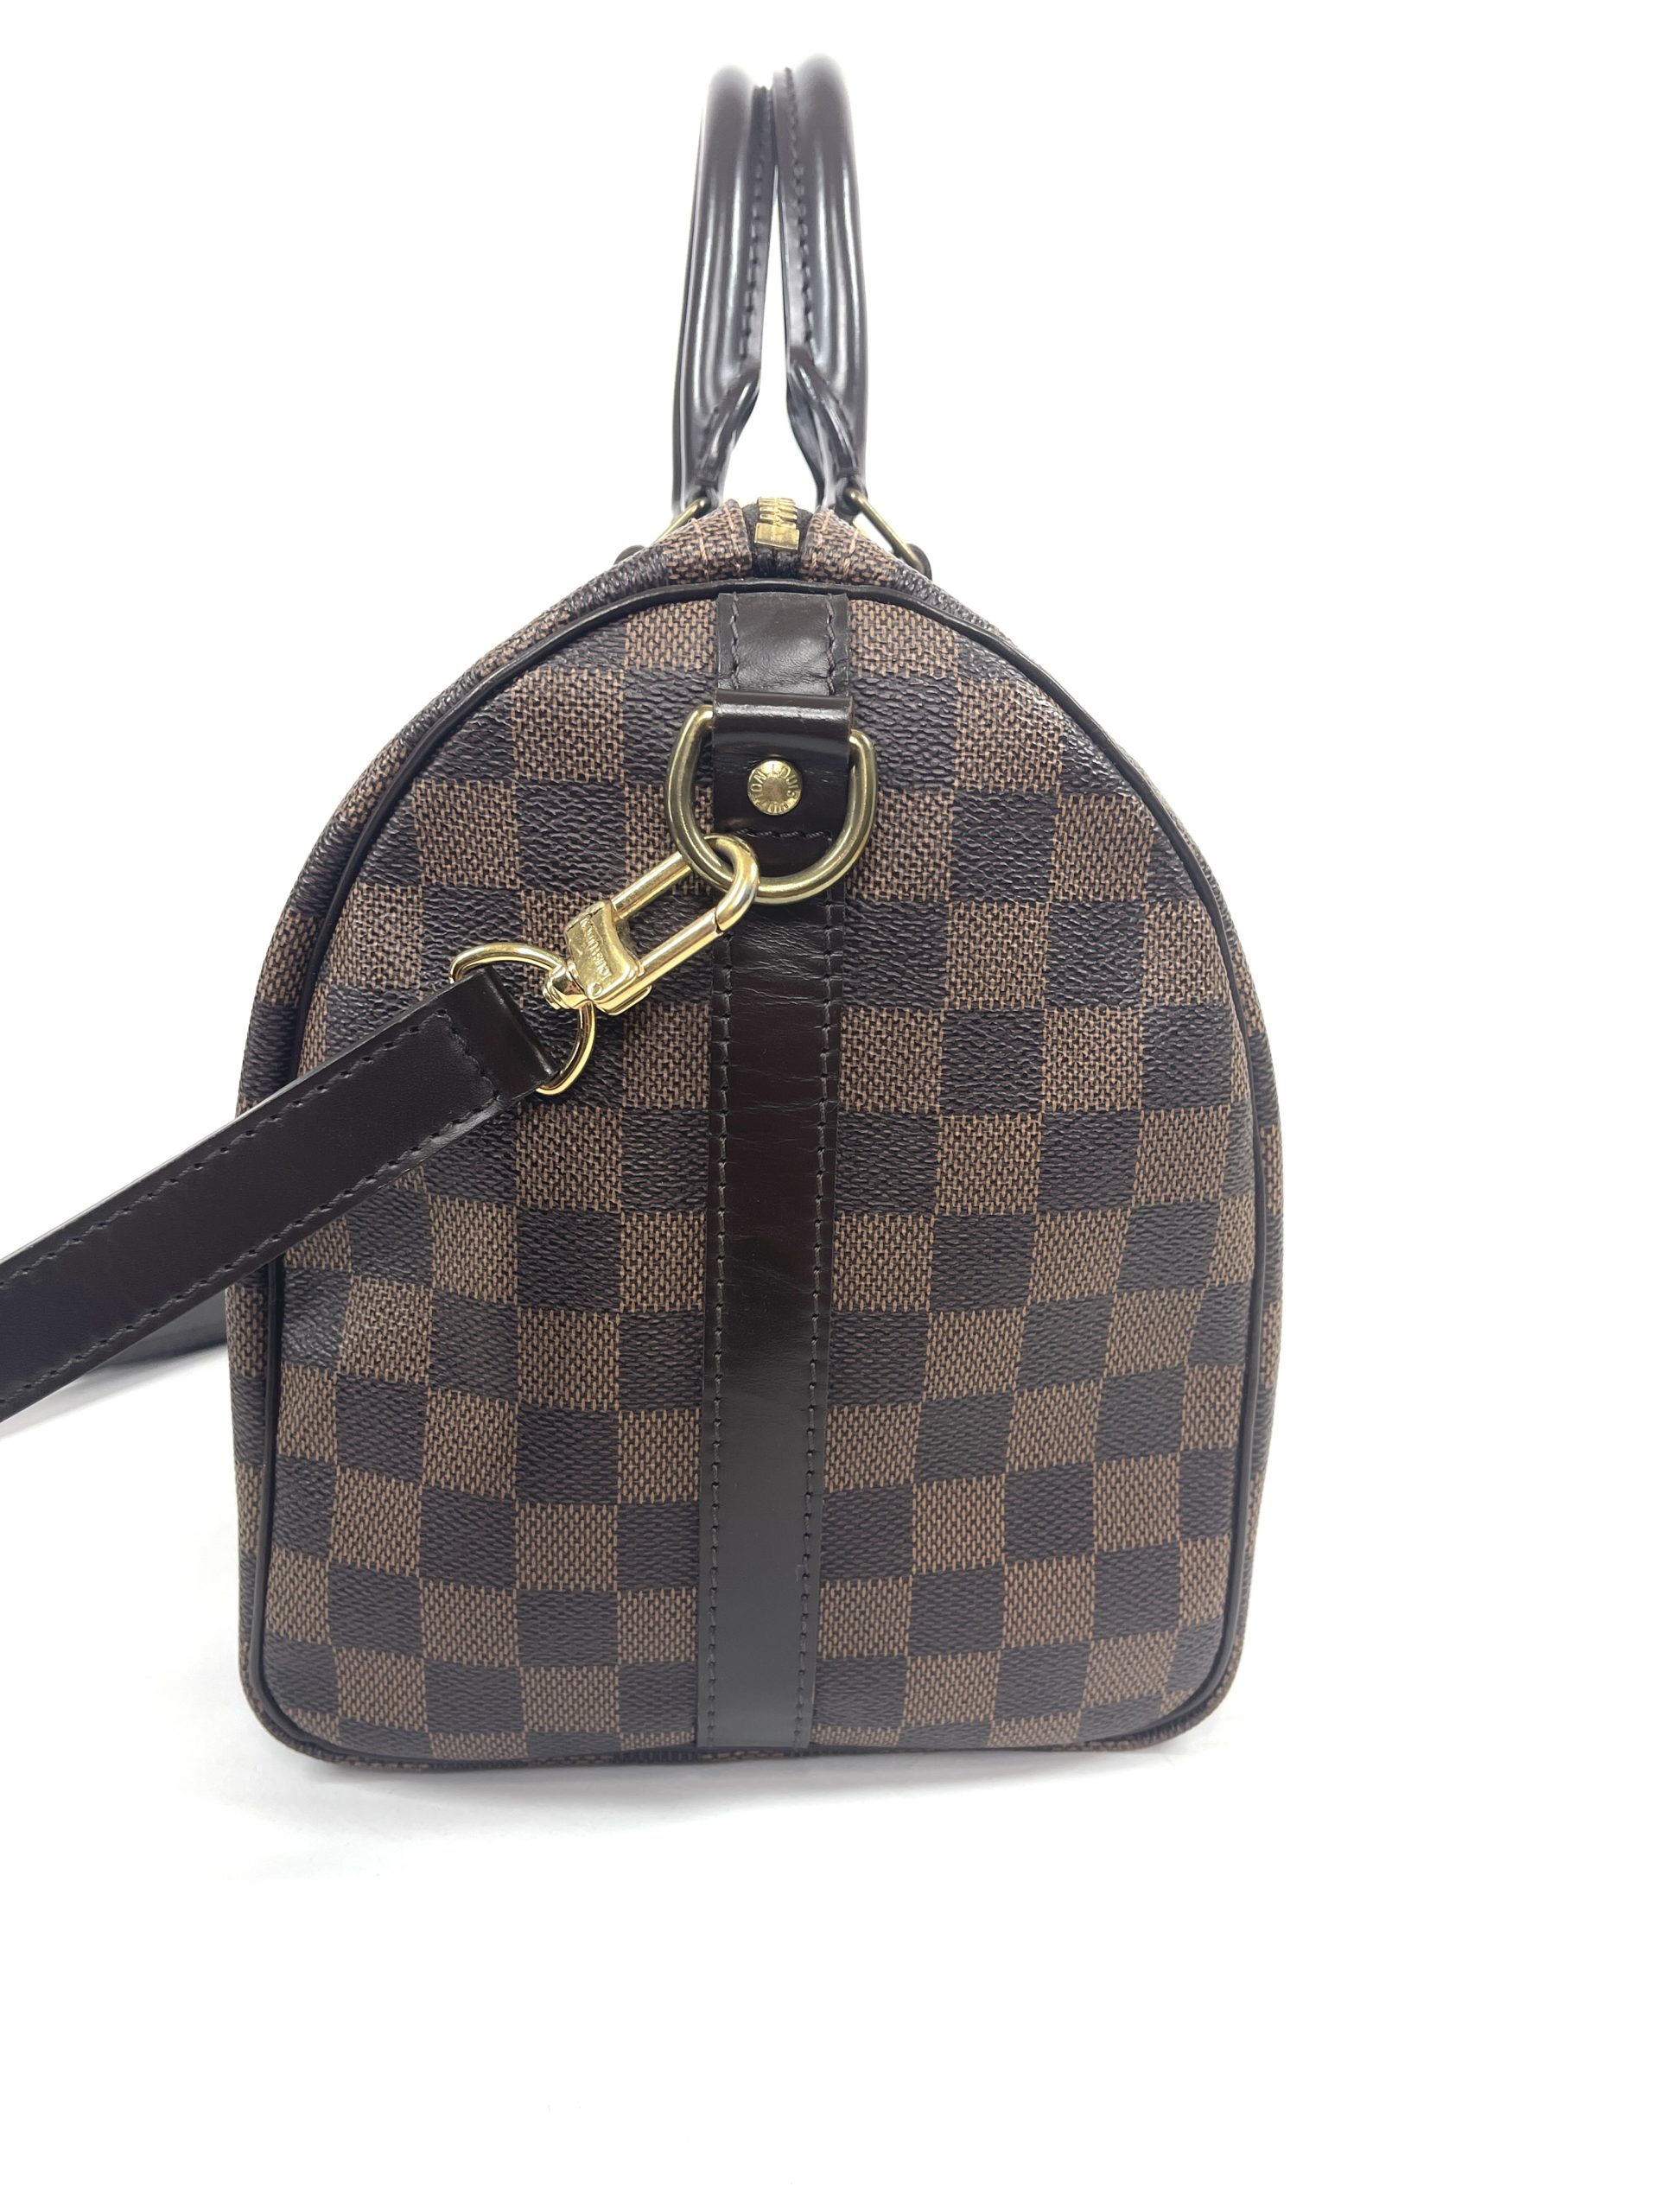 Louis Vuitton Speedy Bandouliere Damier Ebene 30 Brown in Canvas/Leather  with Brass - US